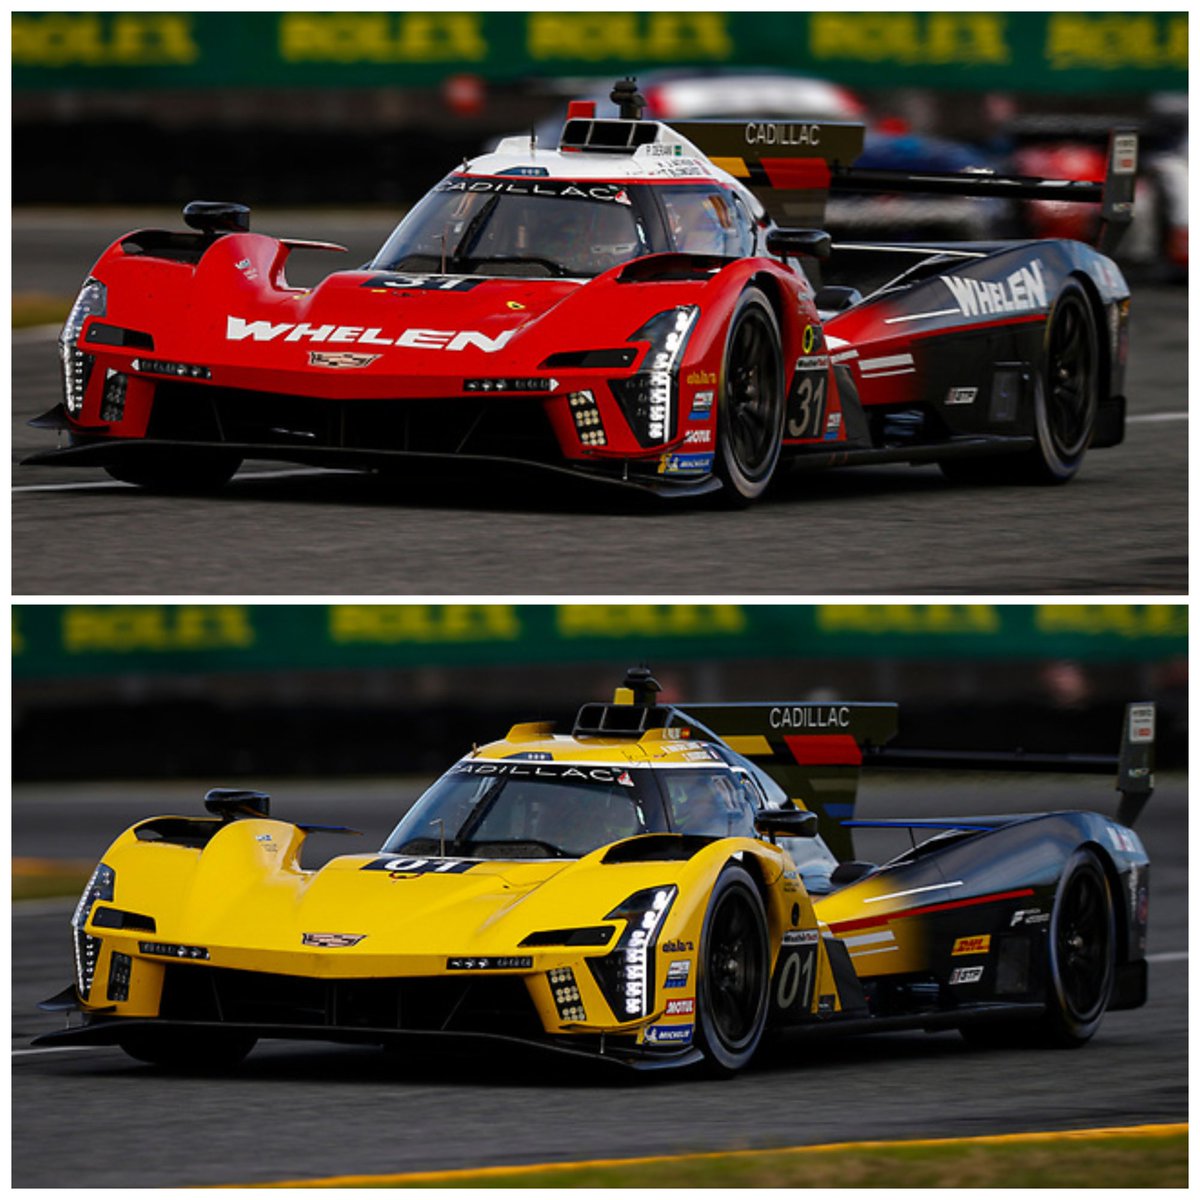 Which factory Cadillac team do you think is stronger in #IMSA?

🟥  Action Express Racing
🟨  Chip Ganassi Racing

📸 IMSA